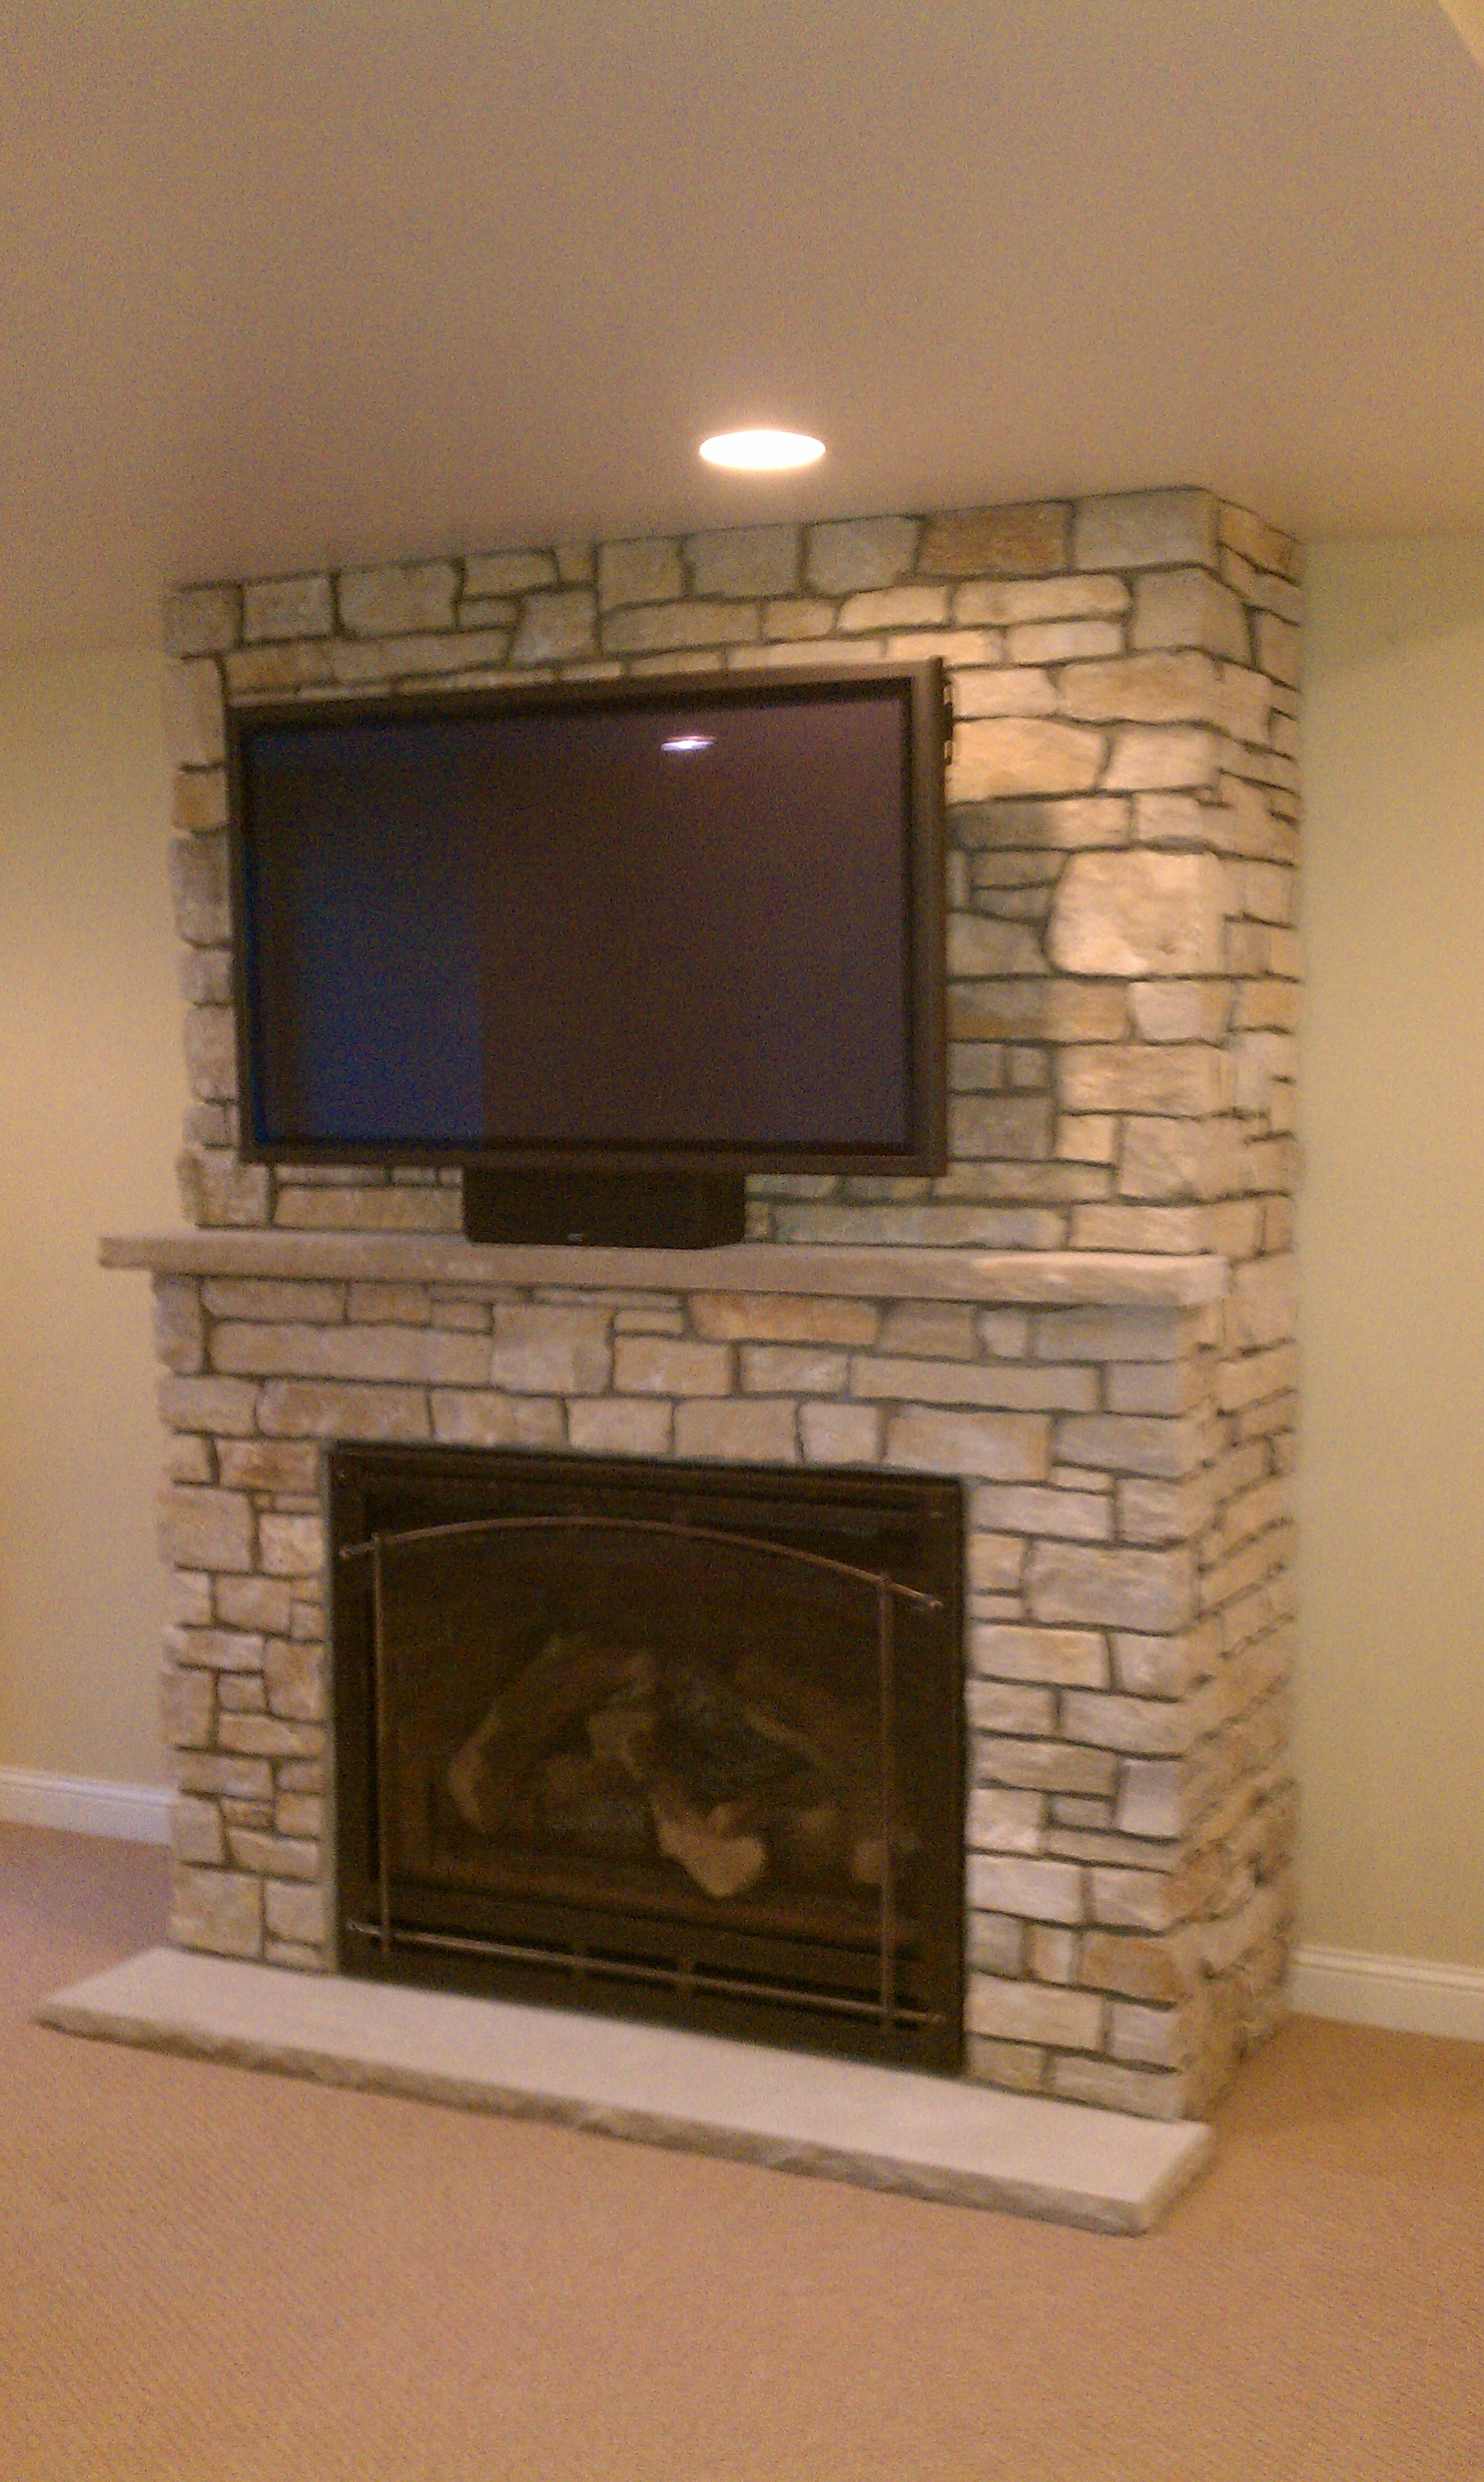 Decorating Ideas for Tv Over Fireplace Inspirational Interior Find Stone Fireplace Ideas Fits Perfectly to Your